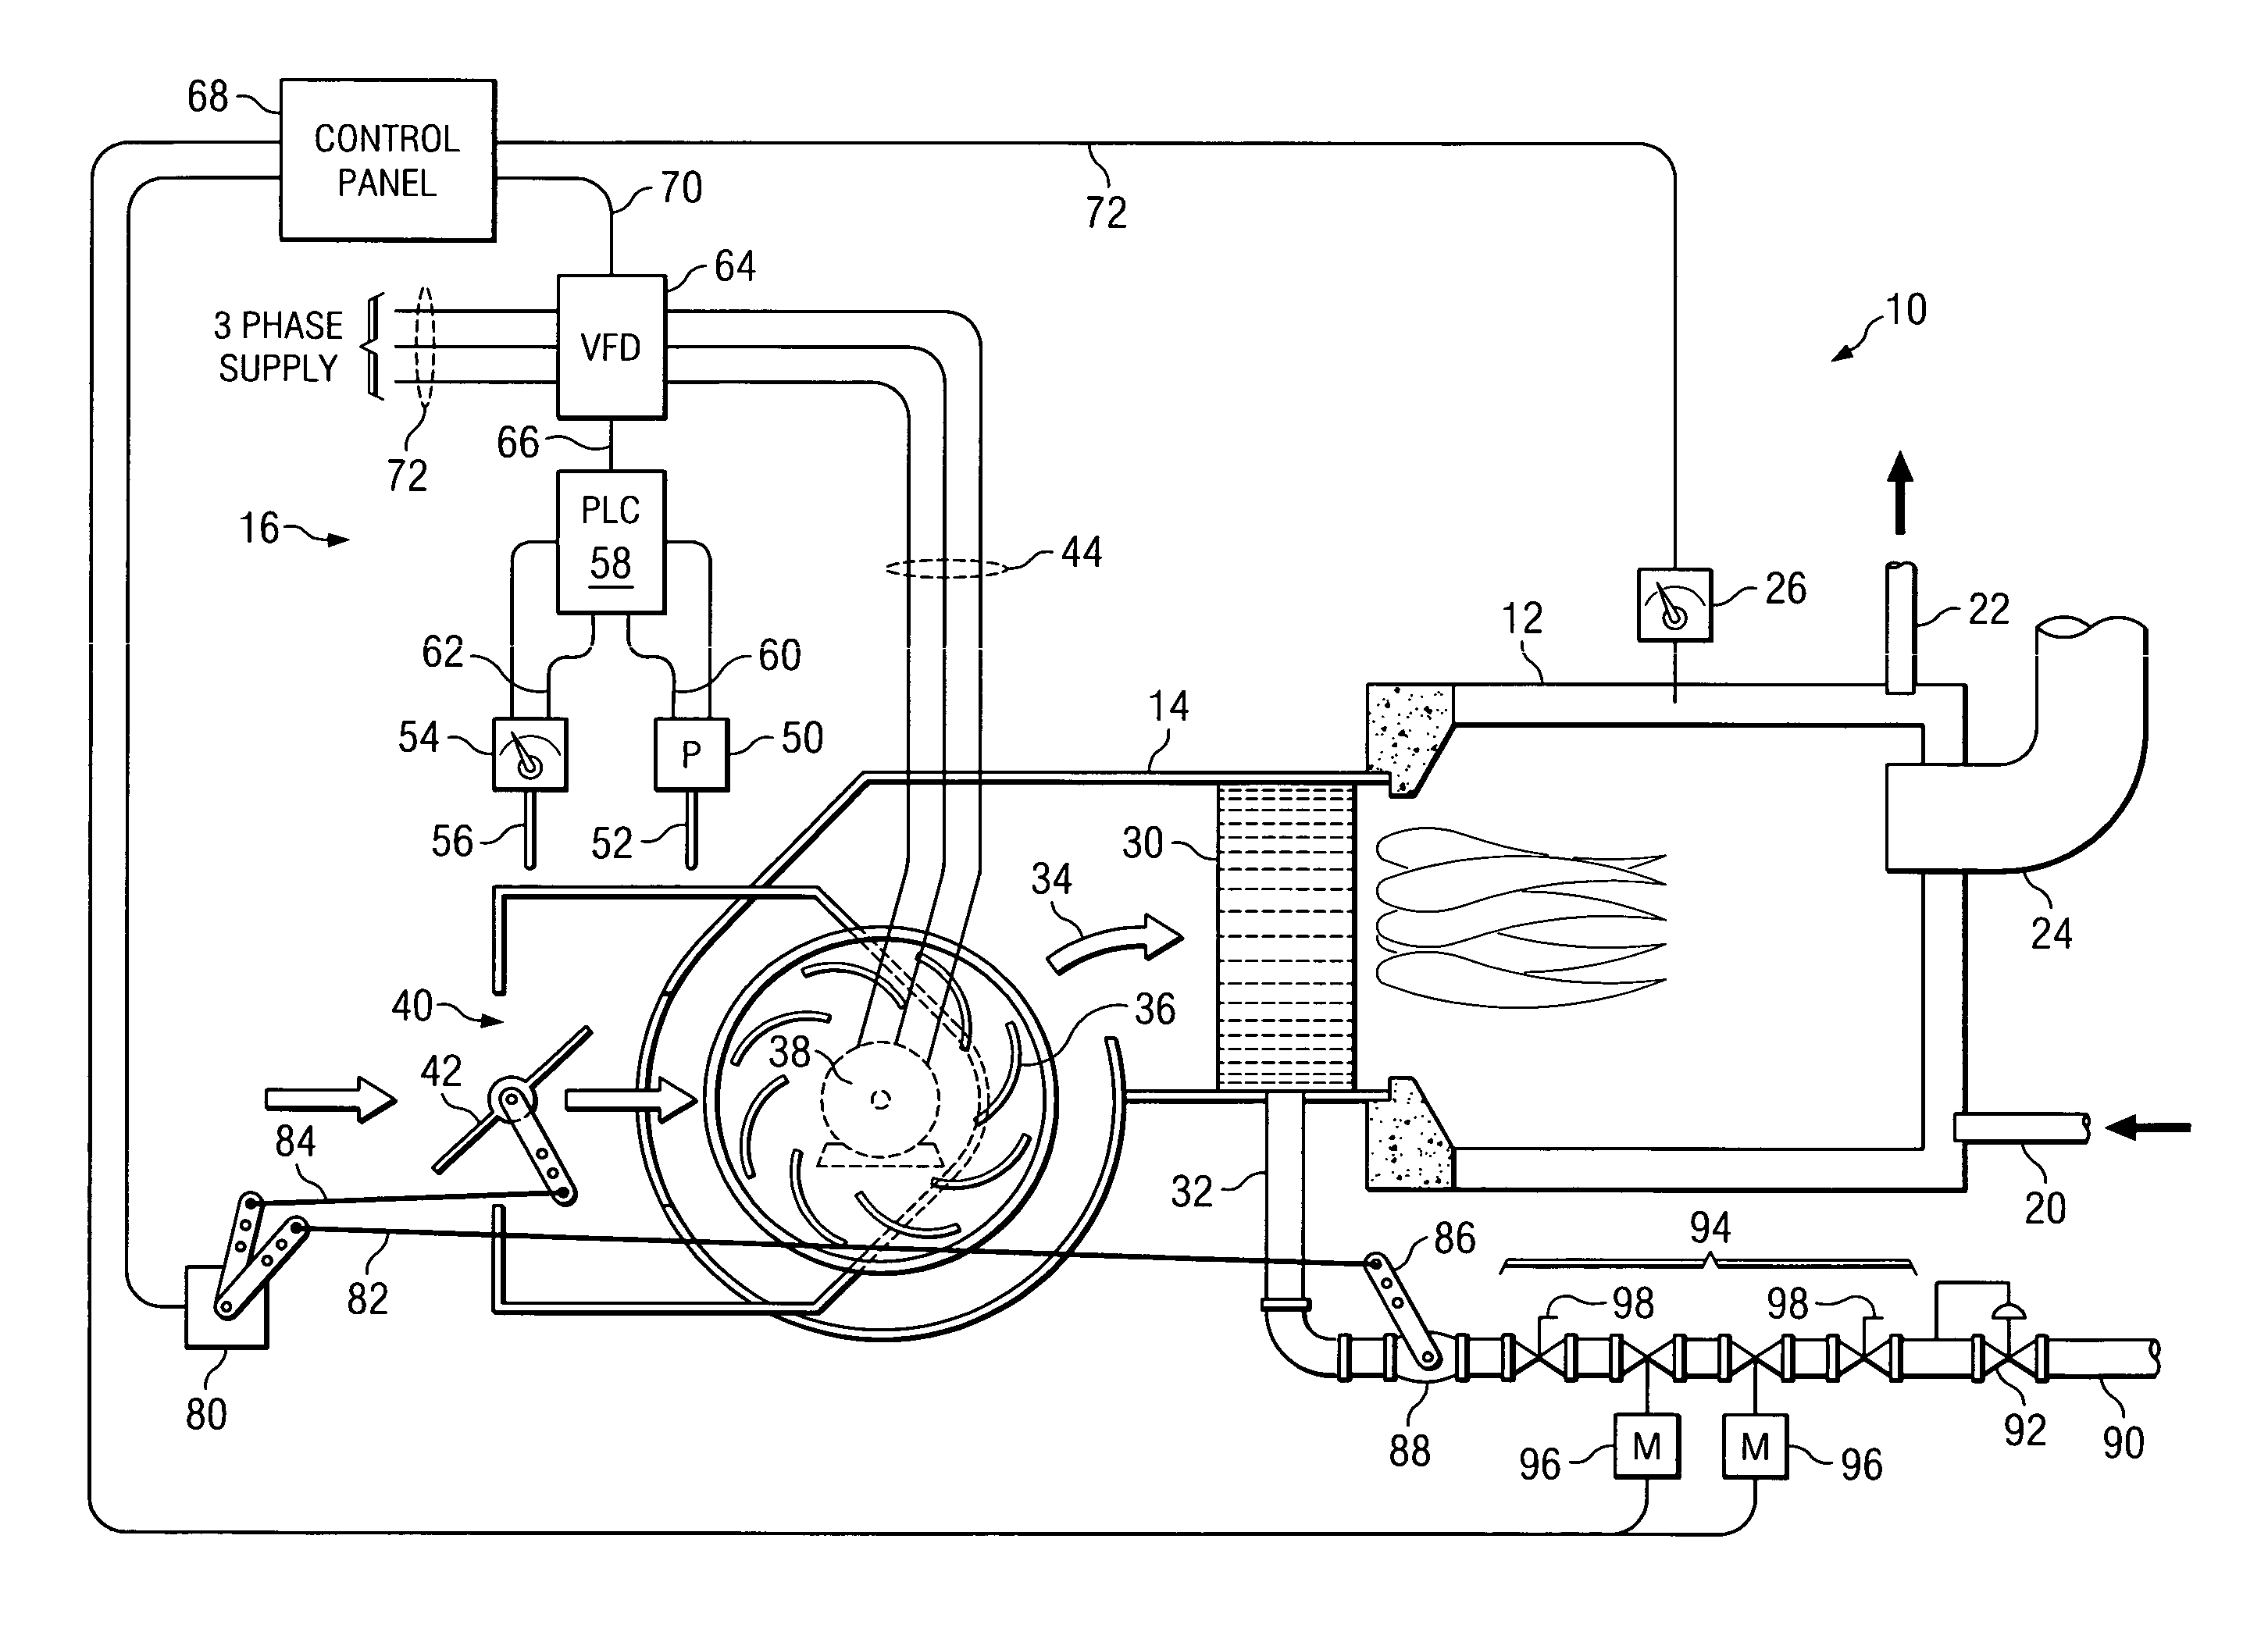 Method and apparatus for controlling combustion in a burner